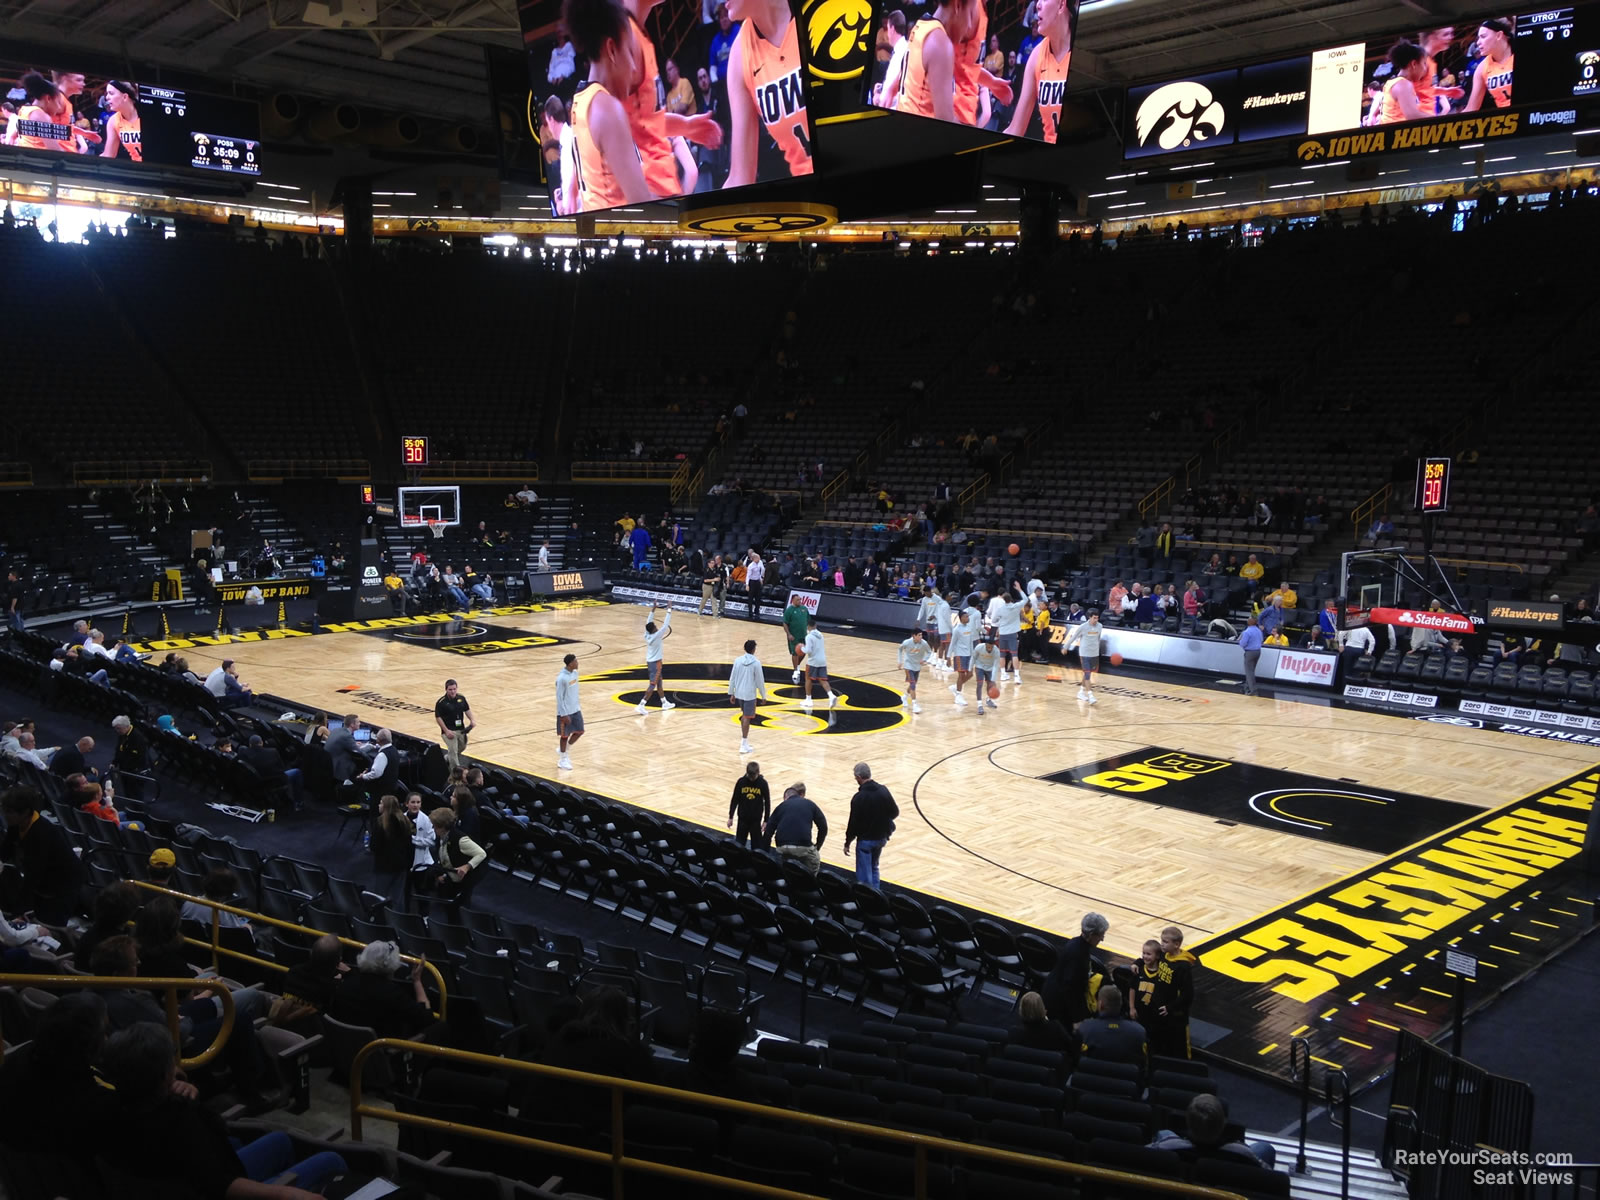 section kk, row 15 seat view  - carver-hawkeye arena